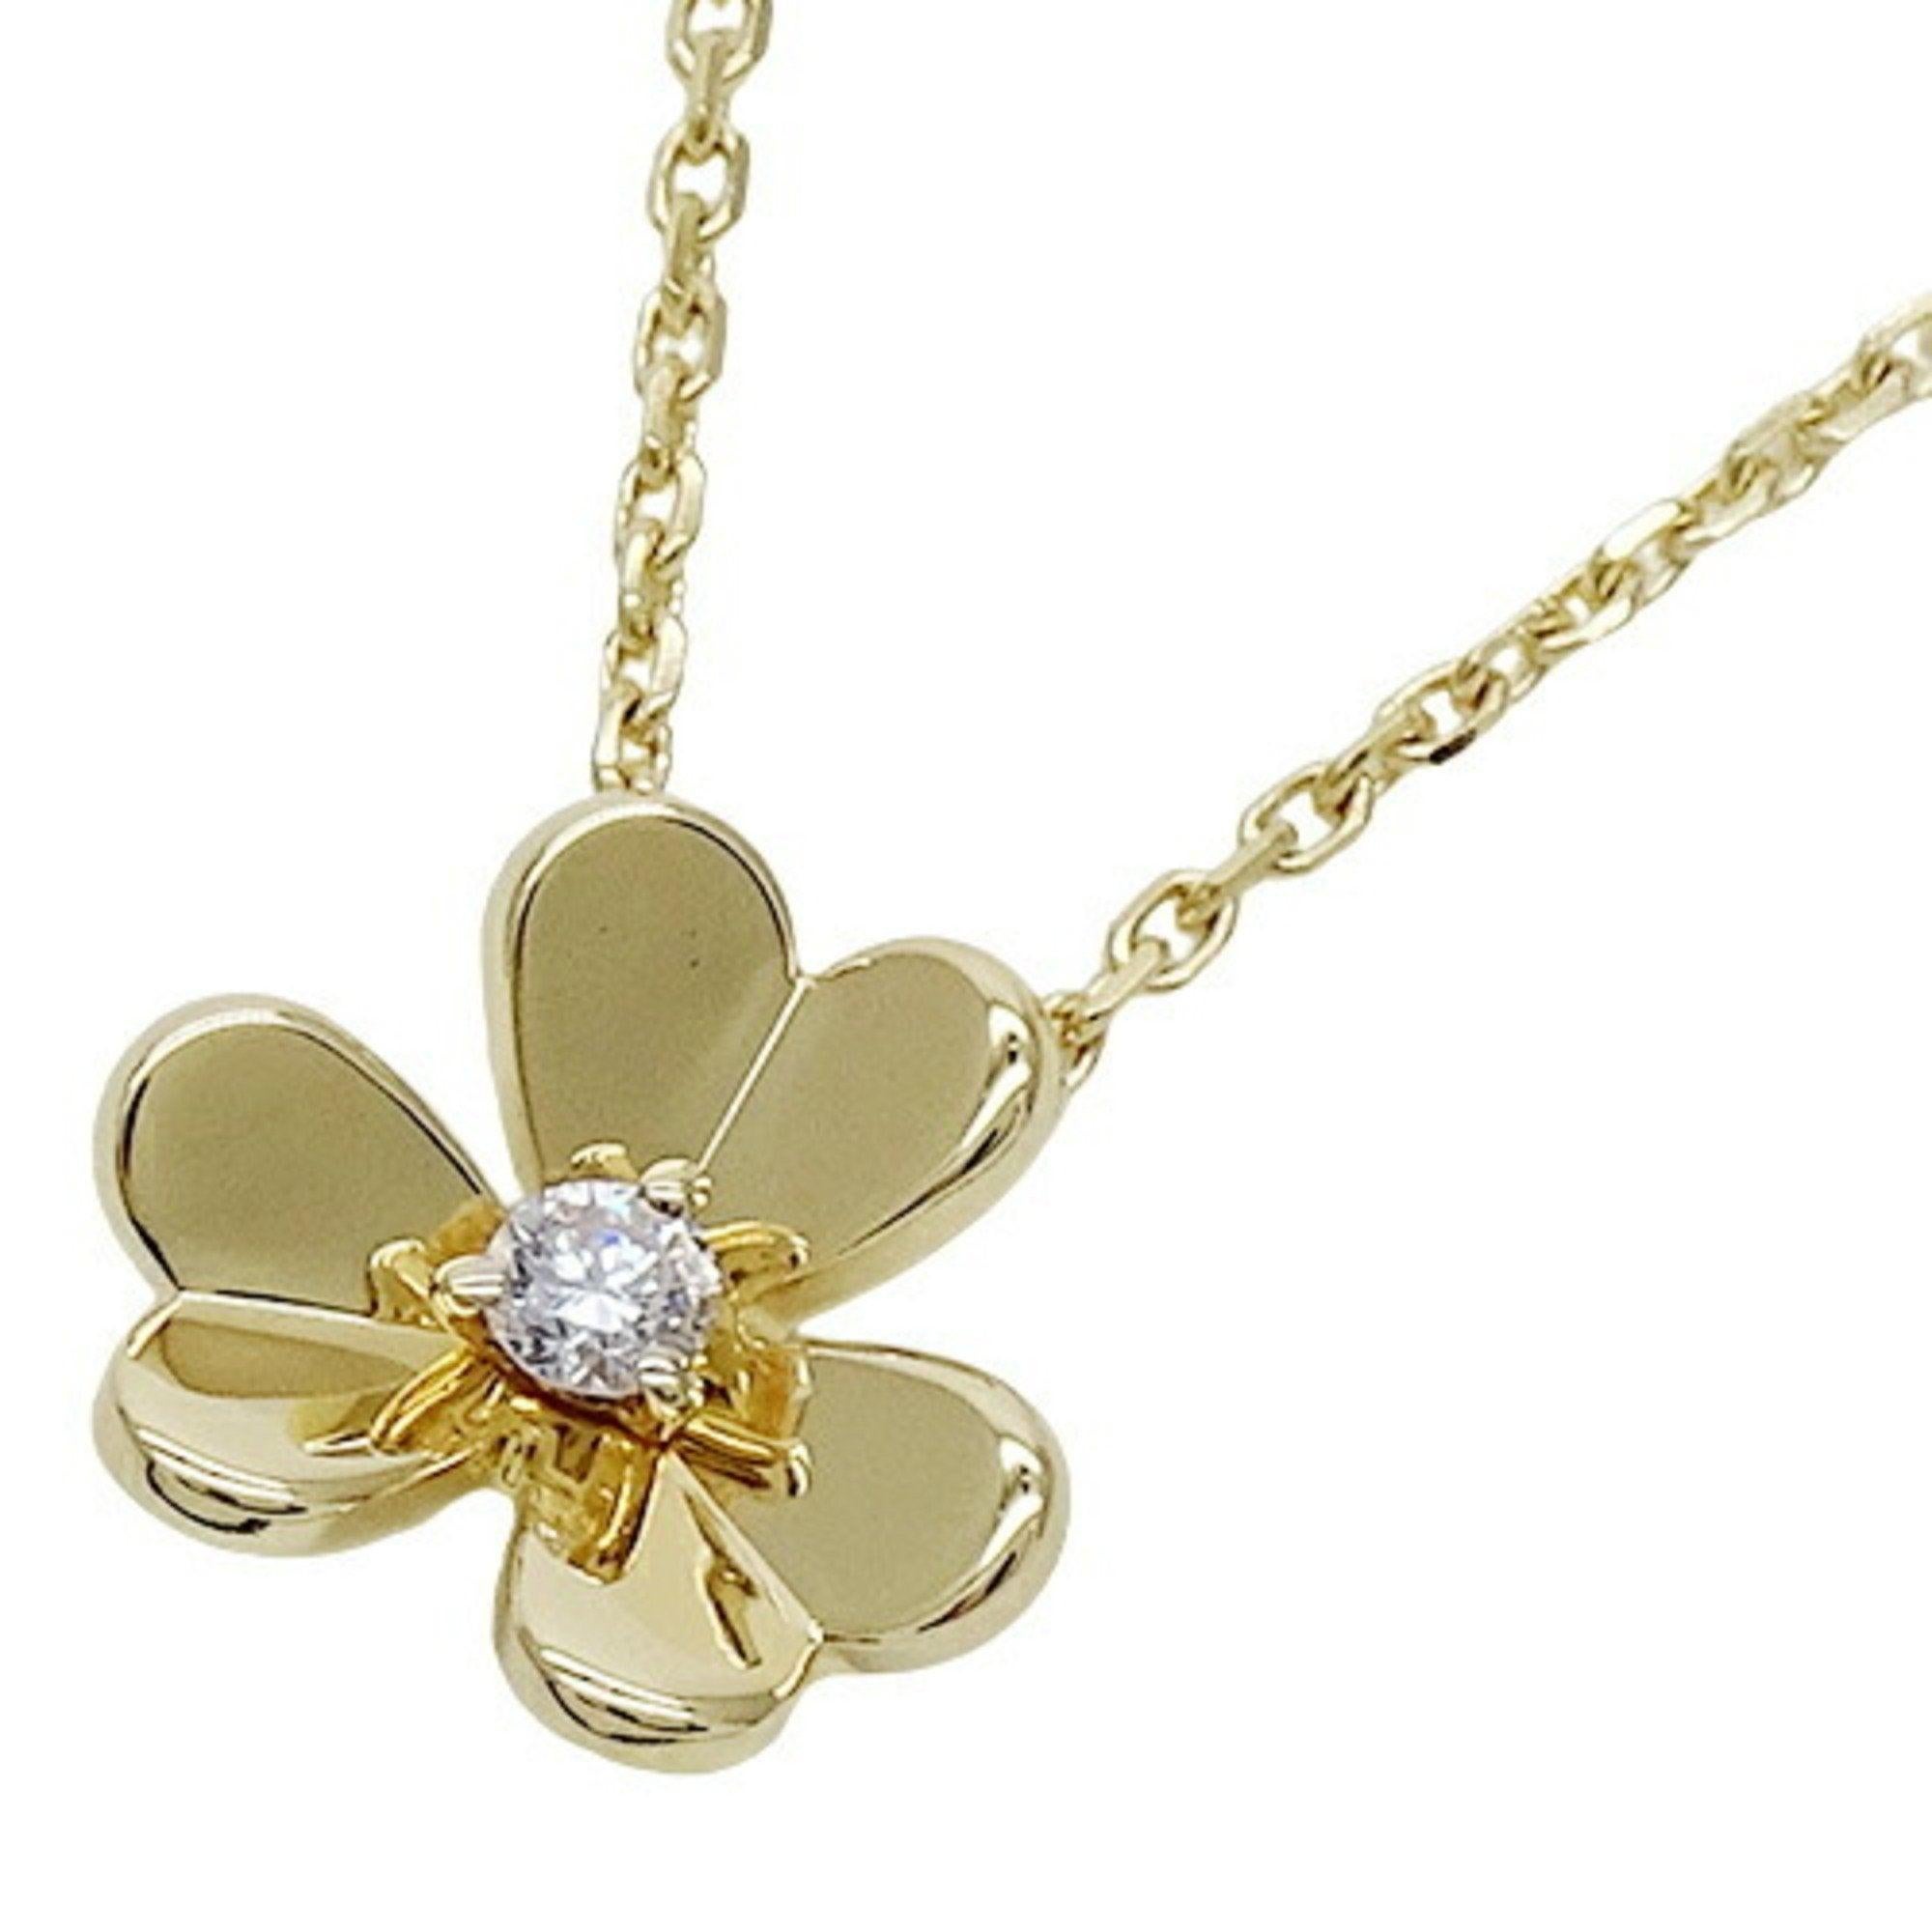 Van Cleef & Arpels Flower Frivole Diamond Necklace in 18K Yellow Gold

Additional information:
Brand: Van Cleef & Arpels
Gender: Women
Line: Frivole
Gemstone: Diamond
Material: Yellow gold (18K)
Condition: Good
Condition details: The item has been